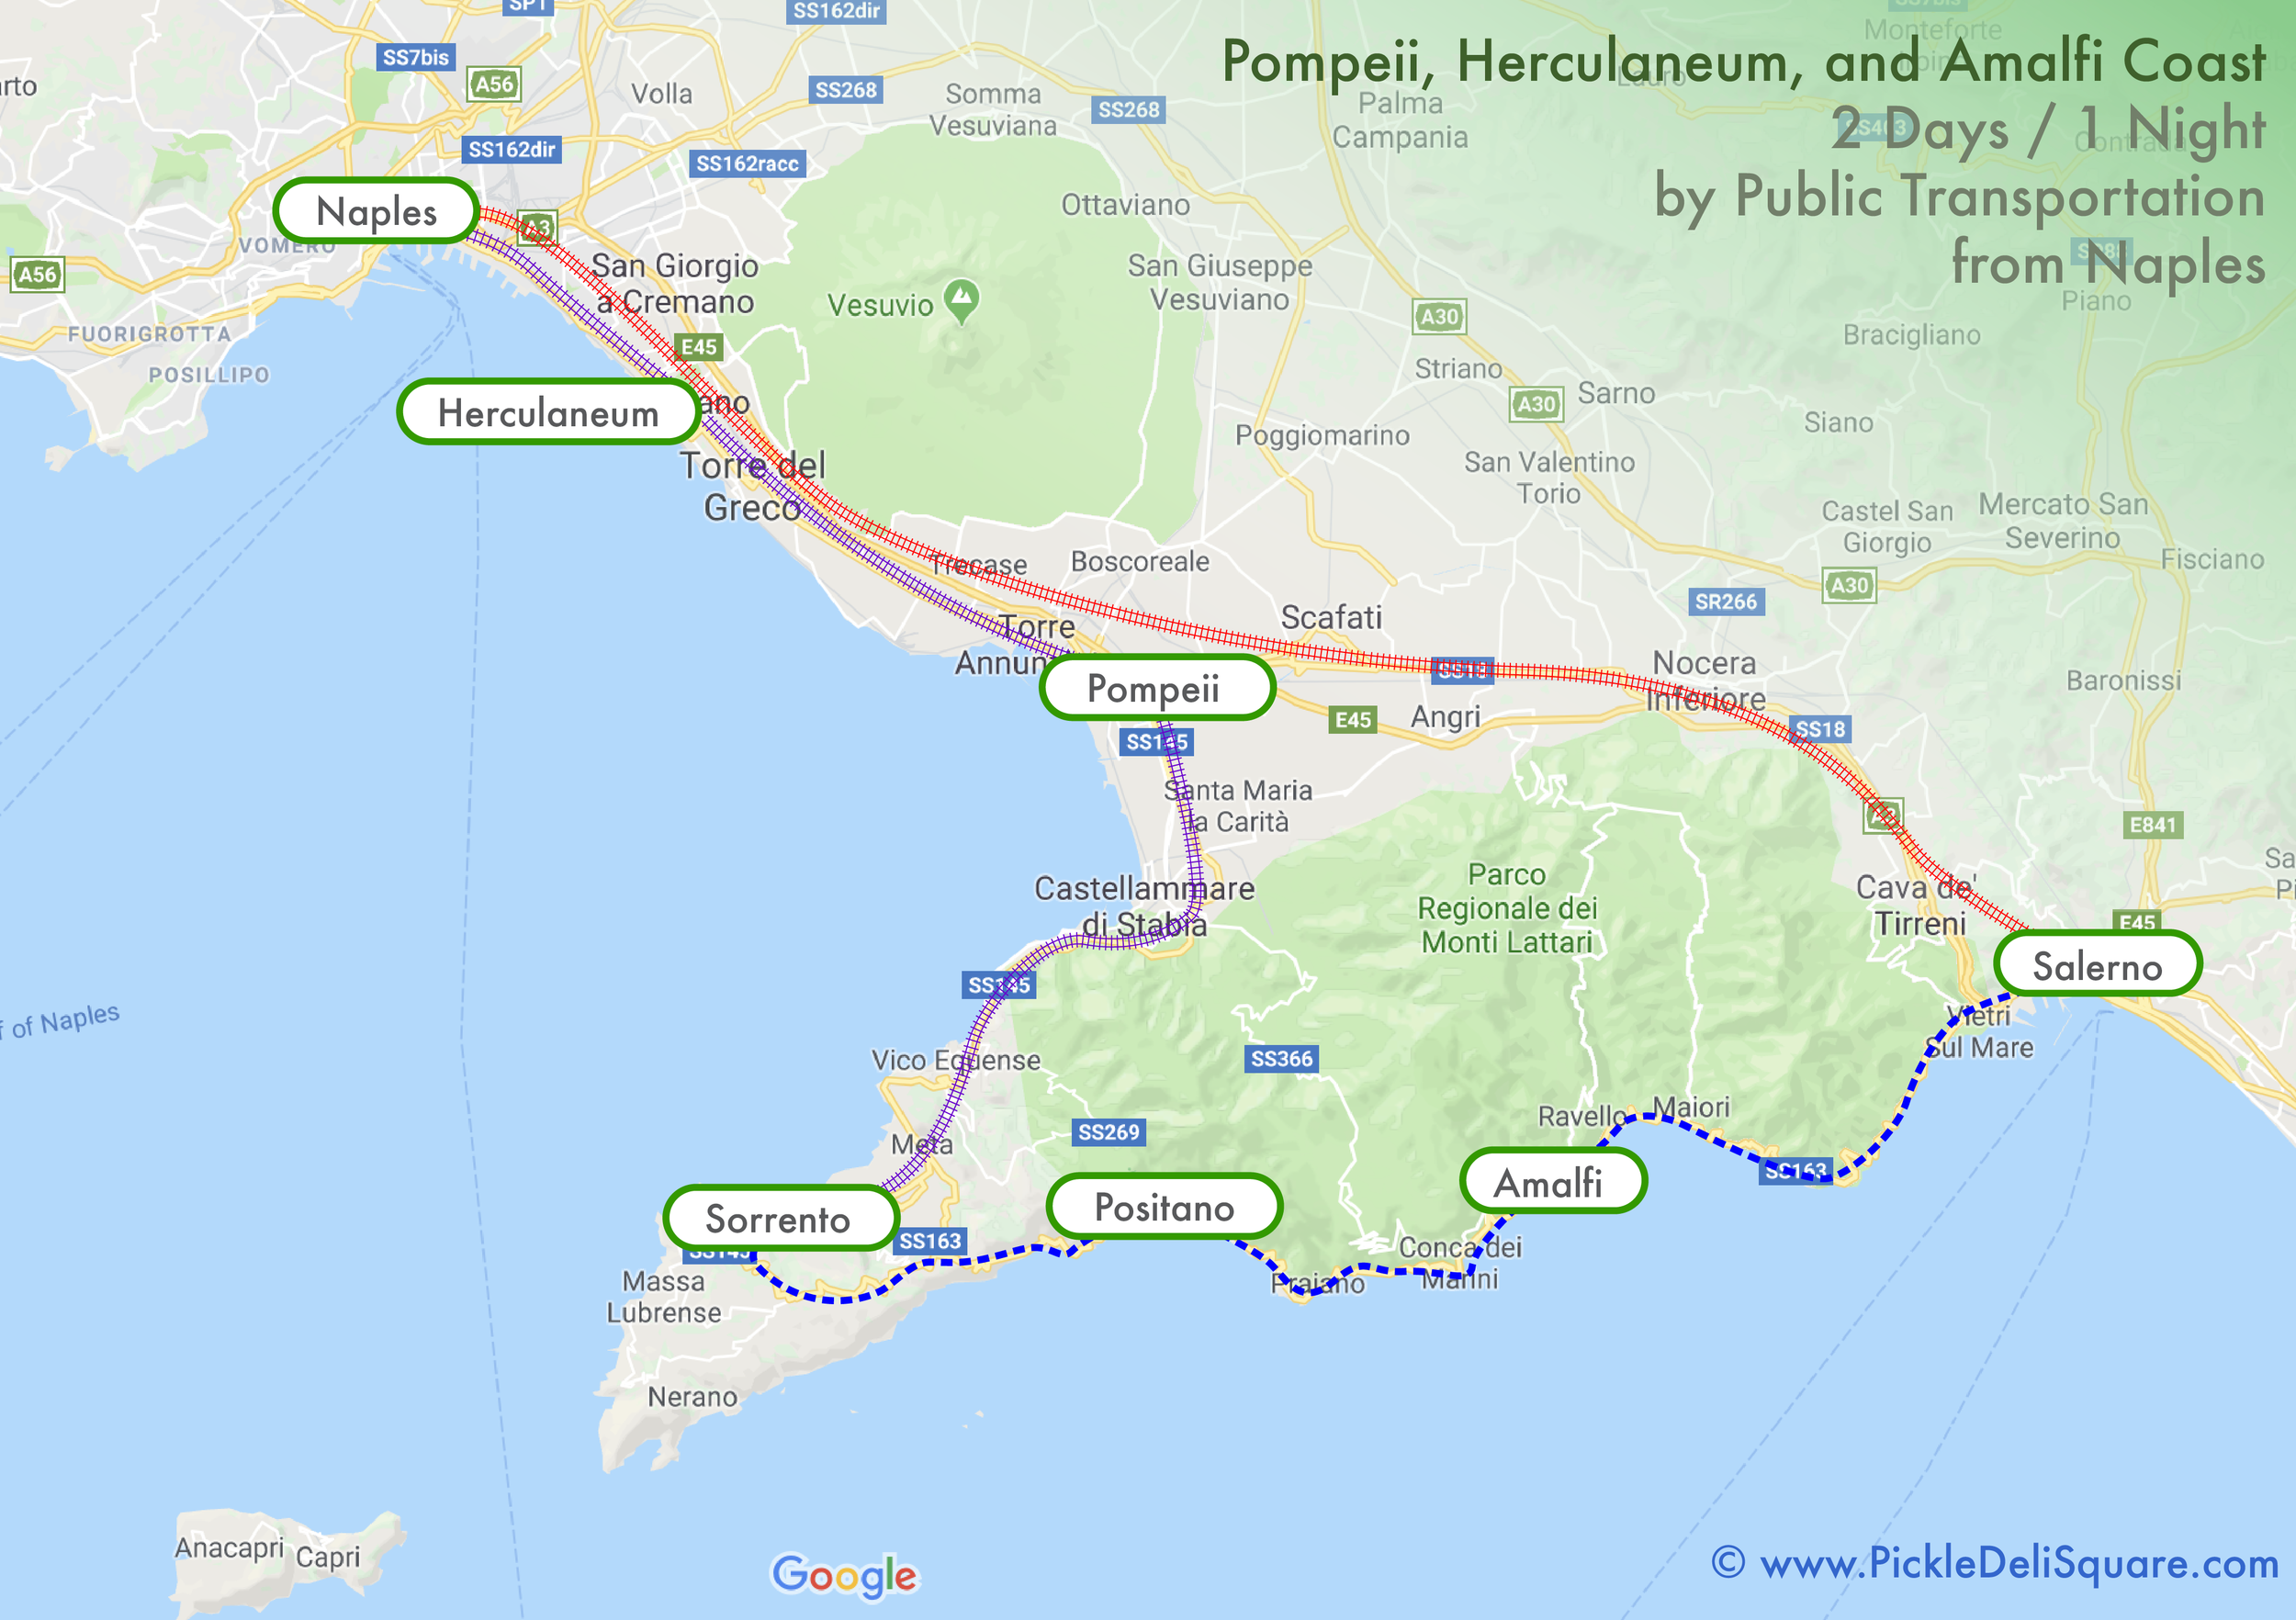 DIY Pompeii and Amalfi Coast: a day / 1 itinerary by public transportation and no backtracking! Pickle Deli